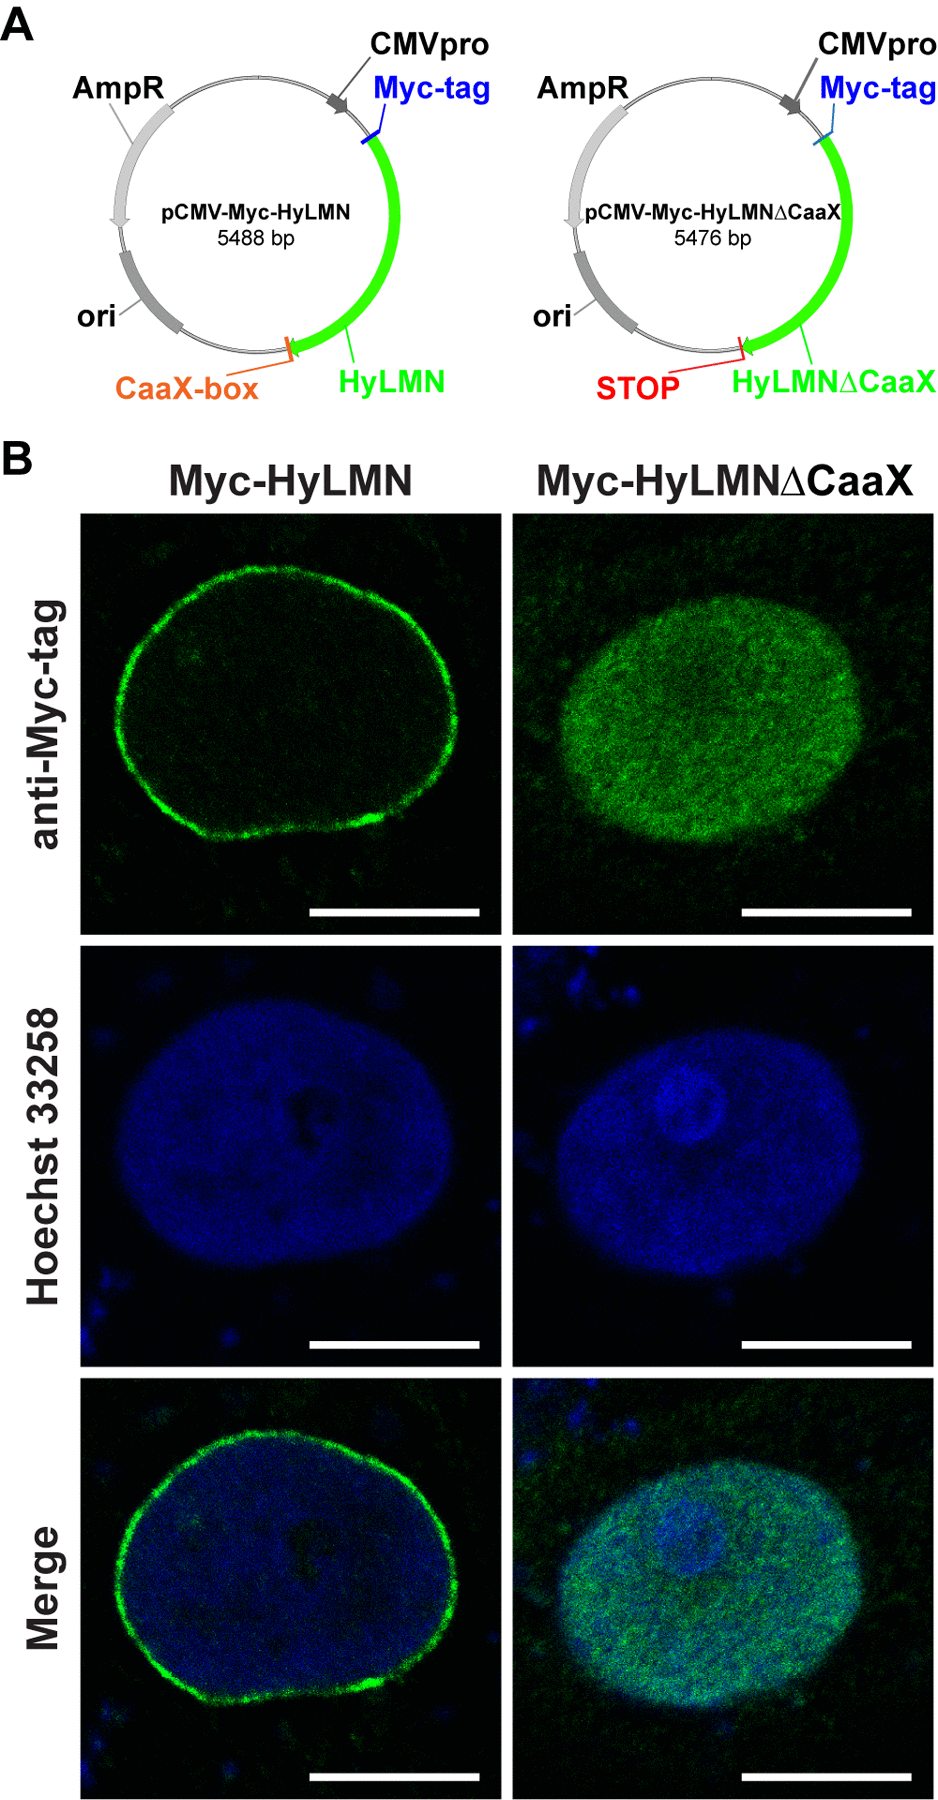 Lamin protein from Hydra is recruited to the nuclear envelope of mammalian cells, if it contains an intact CaaX-box. (A) Maps of two vectors used for the heterologous expression of Hydra HyLMN in COS-7 cells. (B) Transfection of COS-7 cells with a pCMV-Myc-Vector containing full CDS of the hyLMN results in the expression of Myc-tagged HyLMN protein (Myc-HyLMN) localized to the nuclear envelope. If a stop-codon is introduced into the hyLMN CDS resulting in the truncated HyLMN protein lacking the C-terminal CaaX-box (Myc-HyLMNΔCaaX), the protein is not integrated anymore into the nuclear envelope and accumulates in the nucleoplasm.